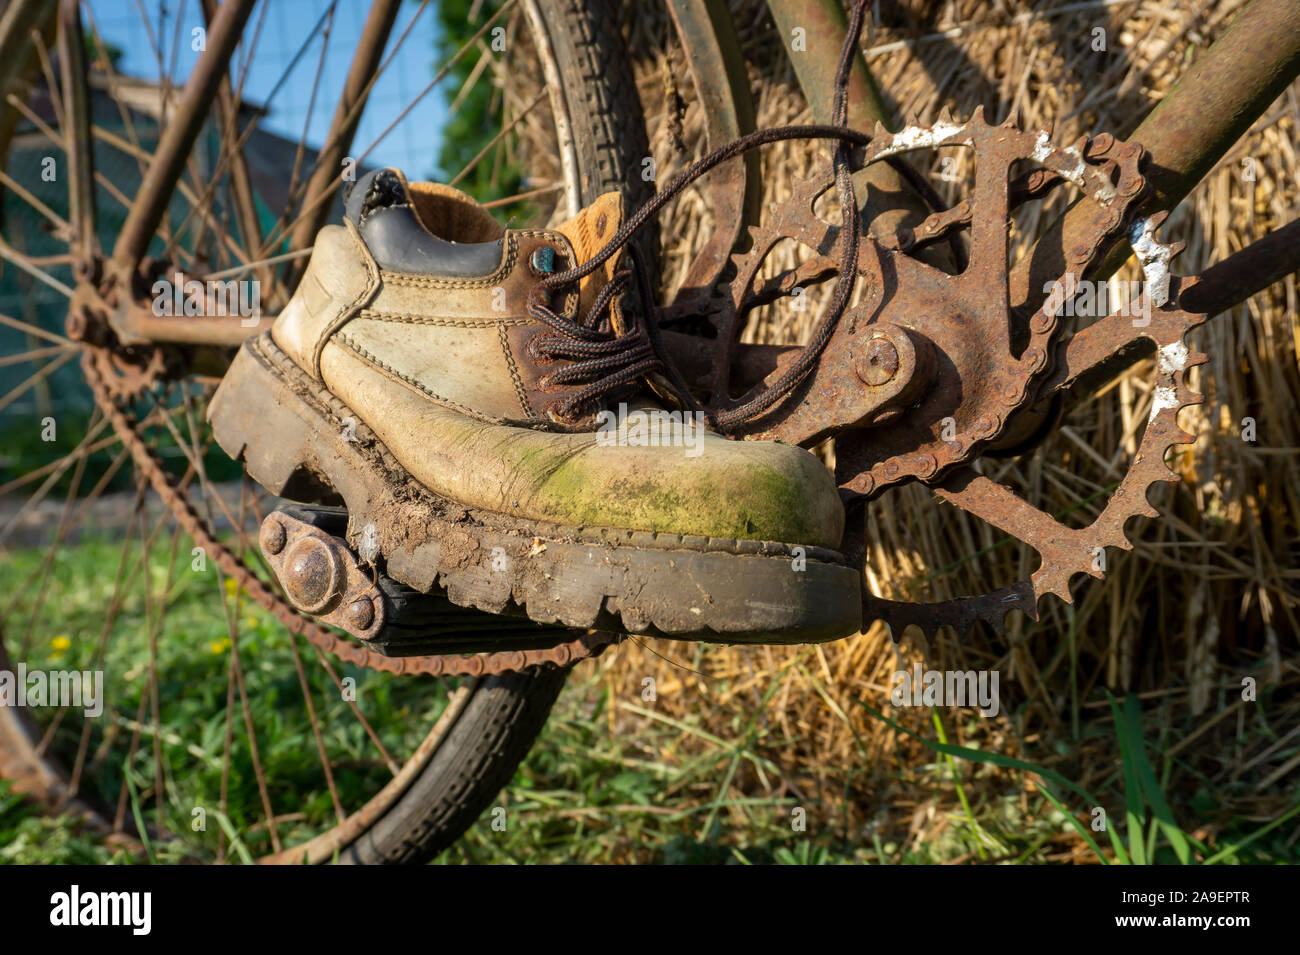 Pair of old worn leather hiking boots on a rusty vintage bicycle outdoors  balanced on the pedals as though riding it Stock Photo - Alamy